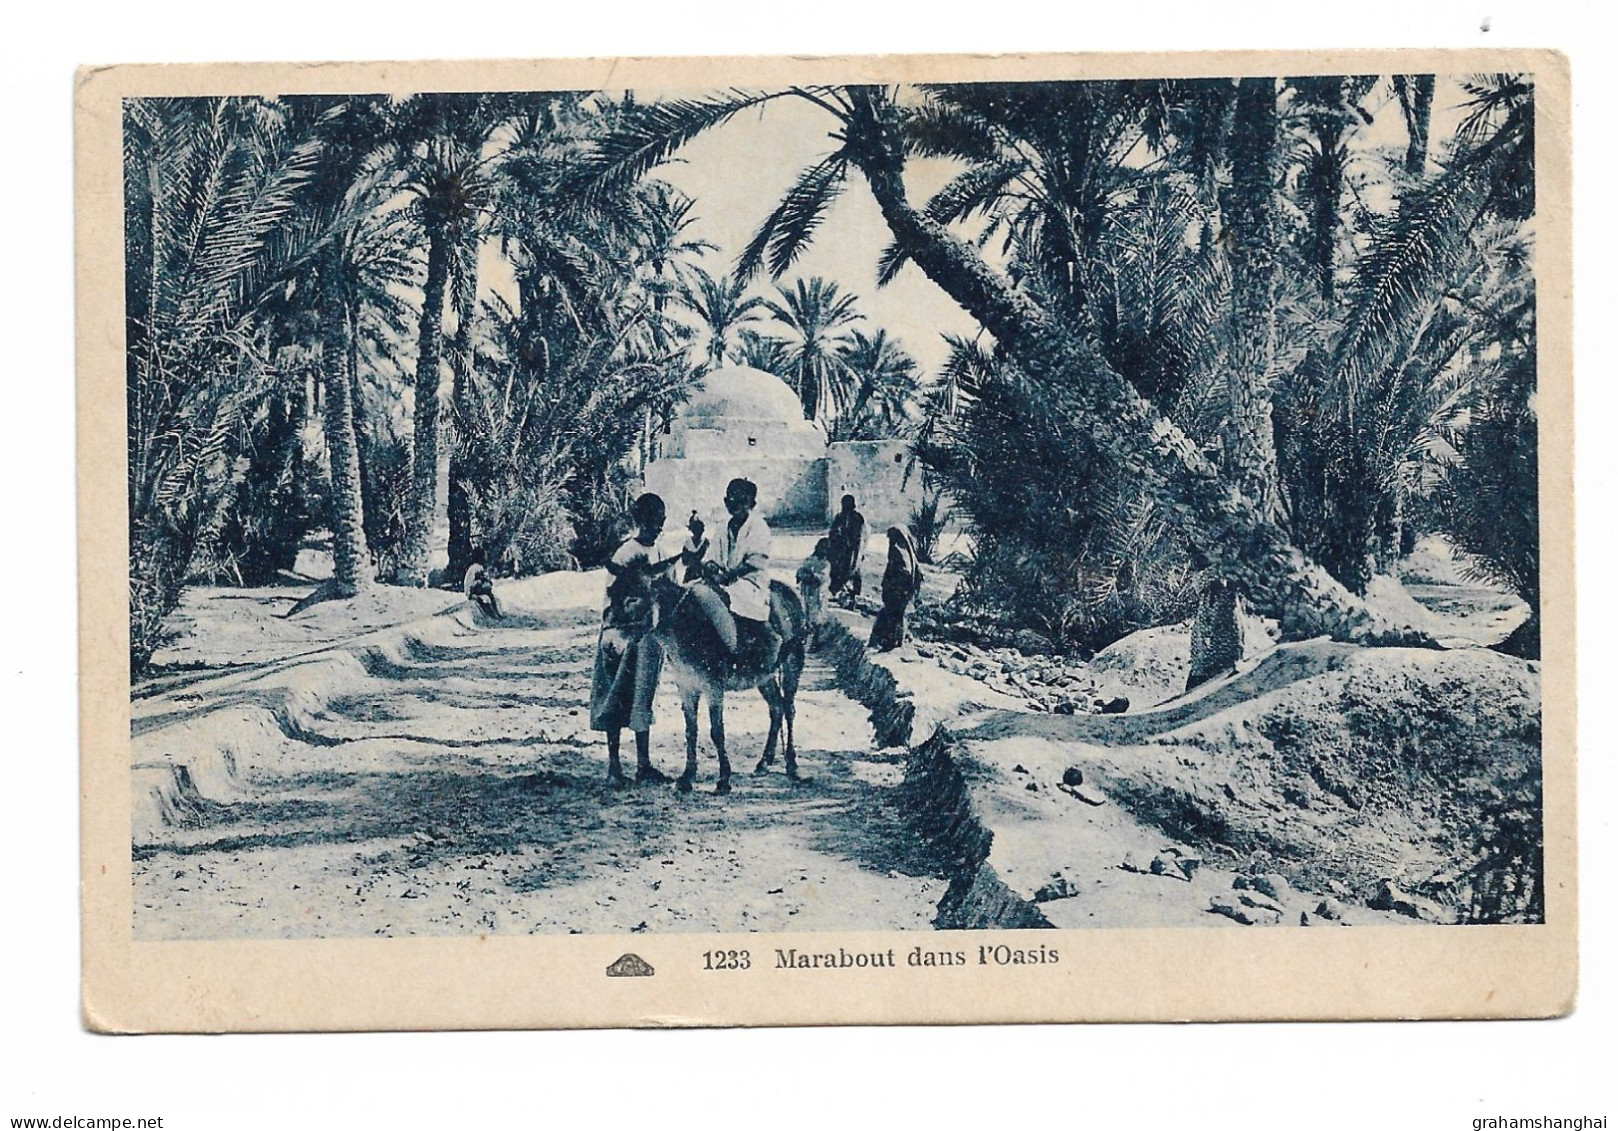 Postcard Tunisia Marabout Dans L'Oasis 1943 British Army Field Post Office FPO255 1 Infantry Division WW2 Gilbert Lewis - Weltkrieg 1939-45